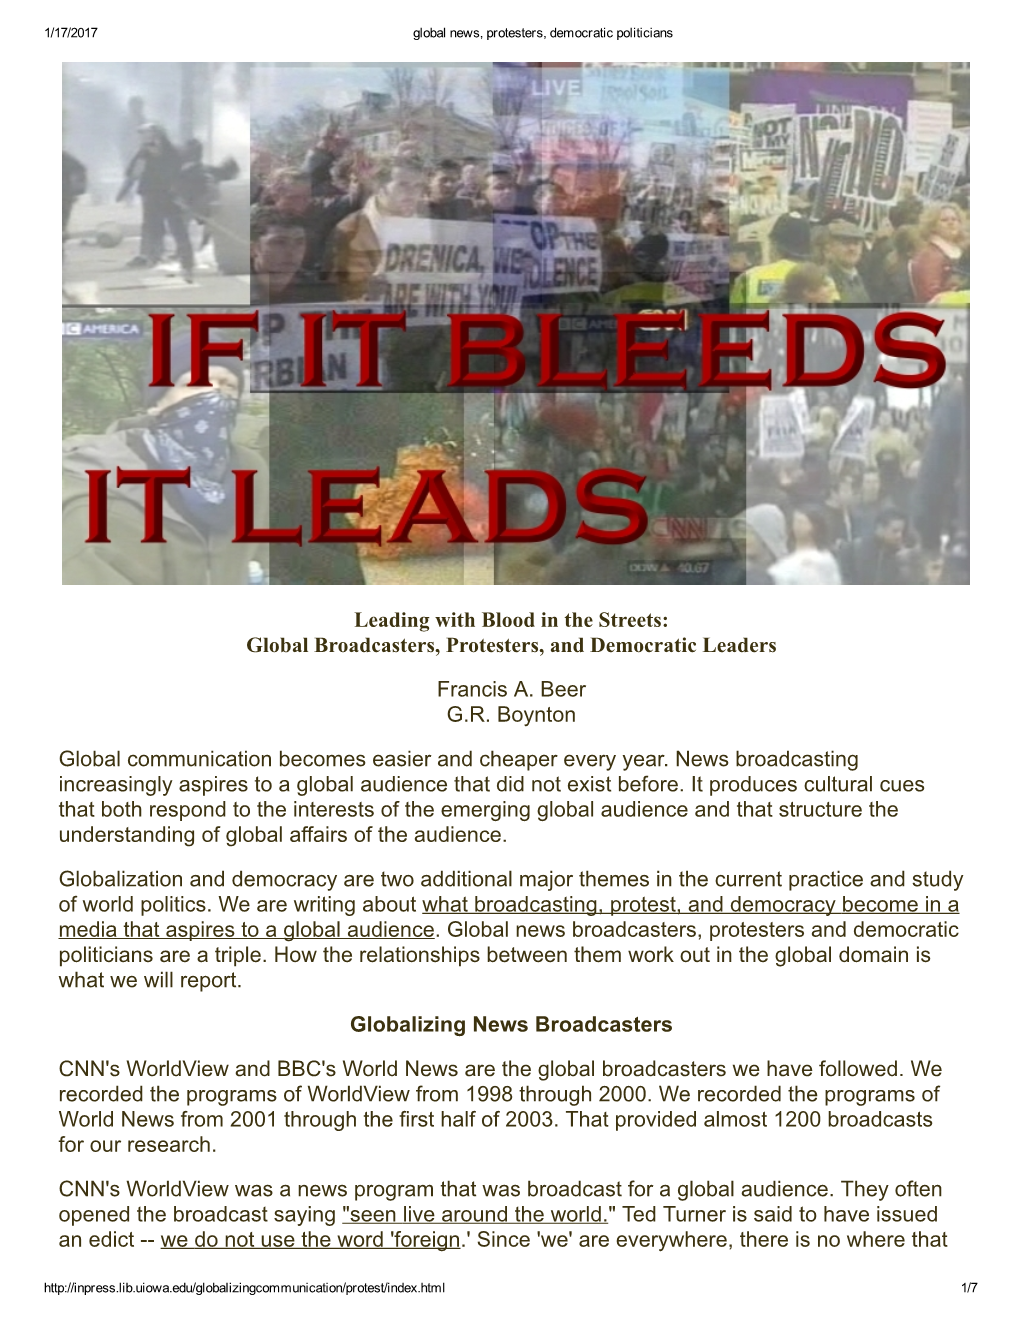 Leading with Blood in the Streets: Global Broadcasters, Protesters, and Democratic Leaders